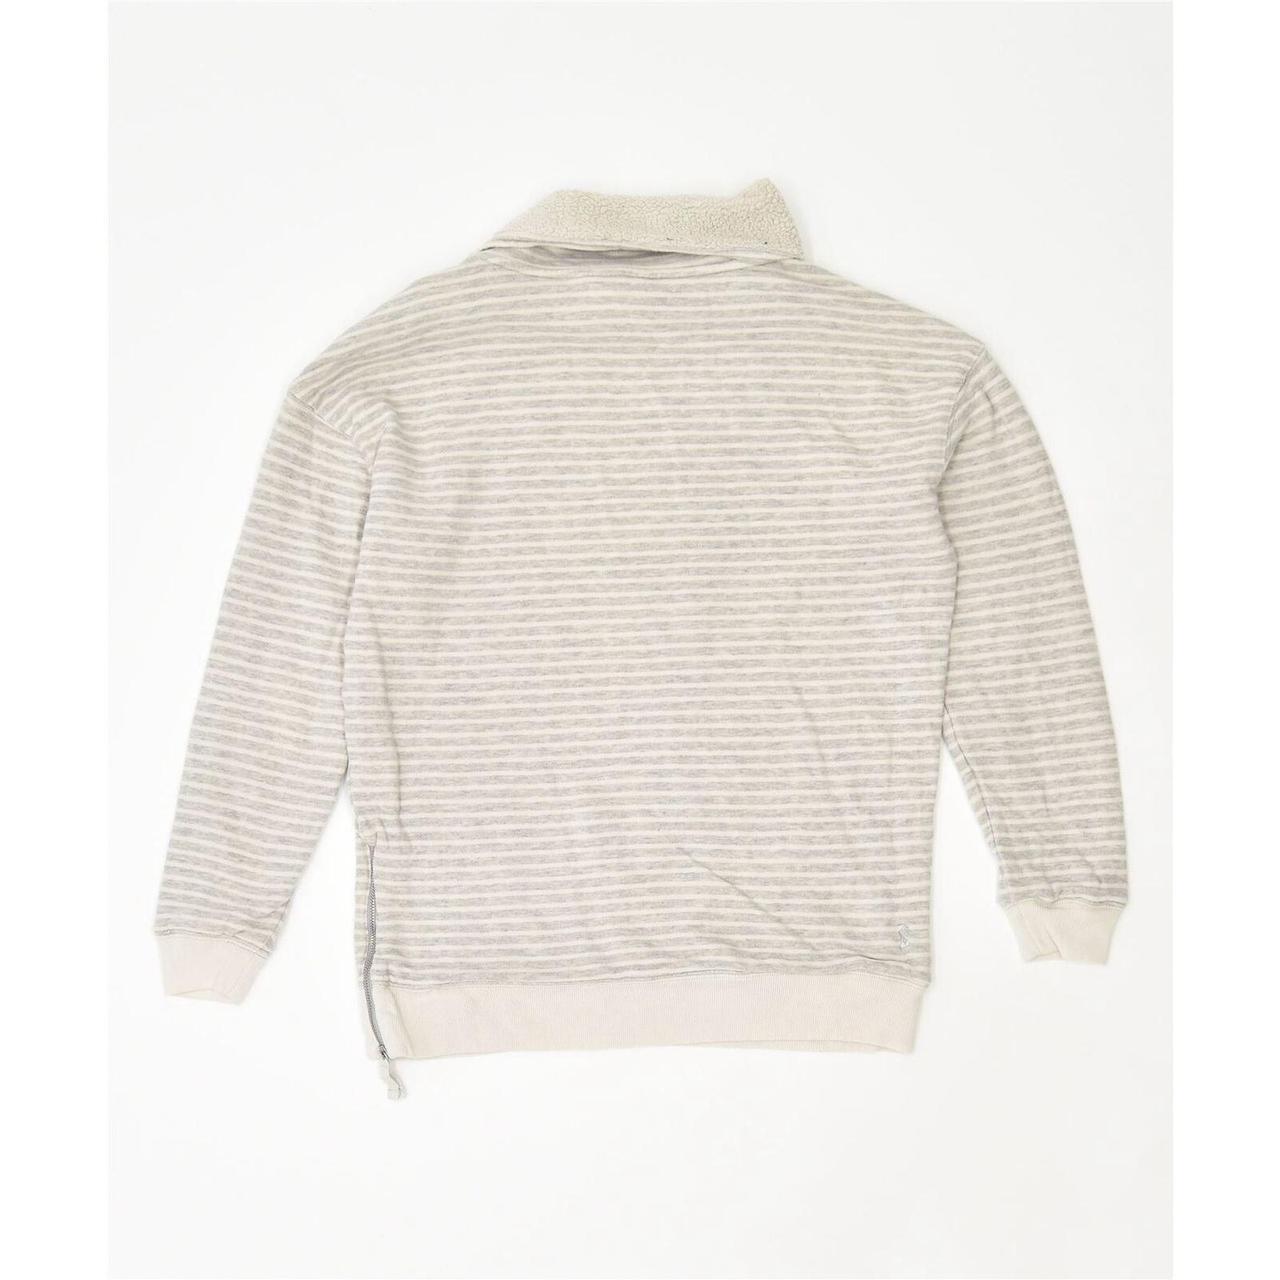 Product Image 2 - JOULES WOMENS OVERSIZED ROLL NECK